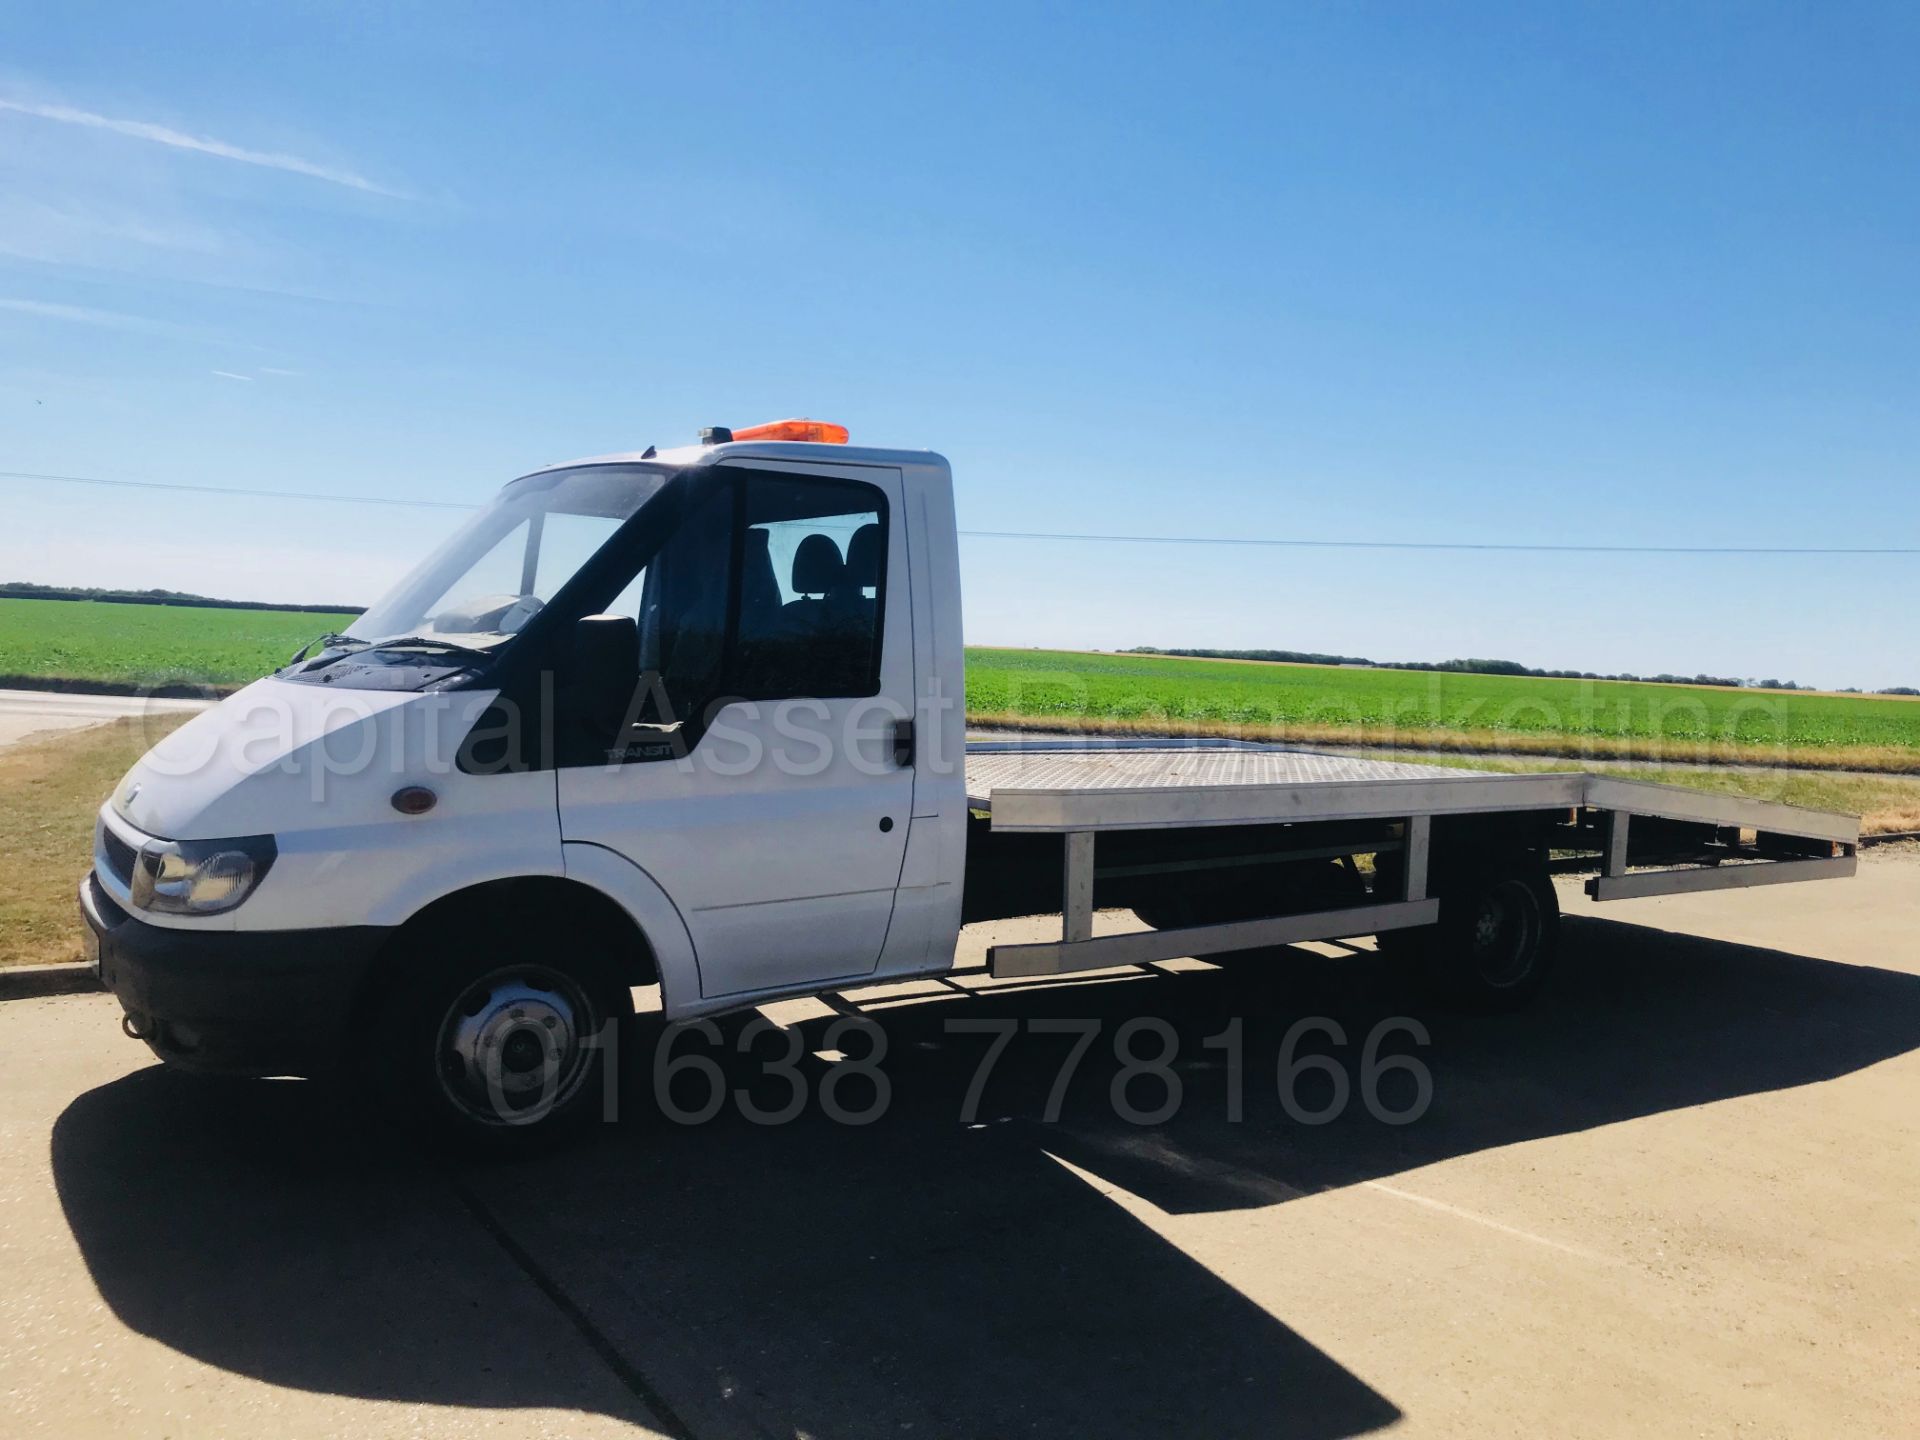 FORD TRANSIT 125 T350 *LWB - RECOVERY TRUCK* (2001 - Y REG) '2.4 TDCI - 5 SPEED' (NO VAT - SAVE 20%) - Image 21 of 25